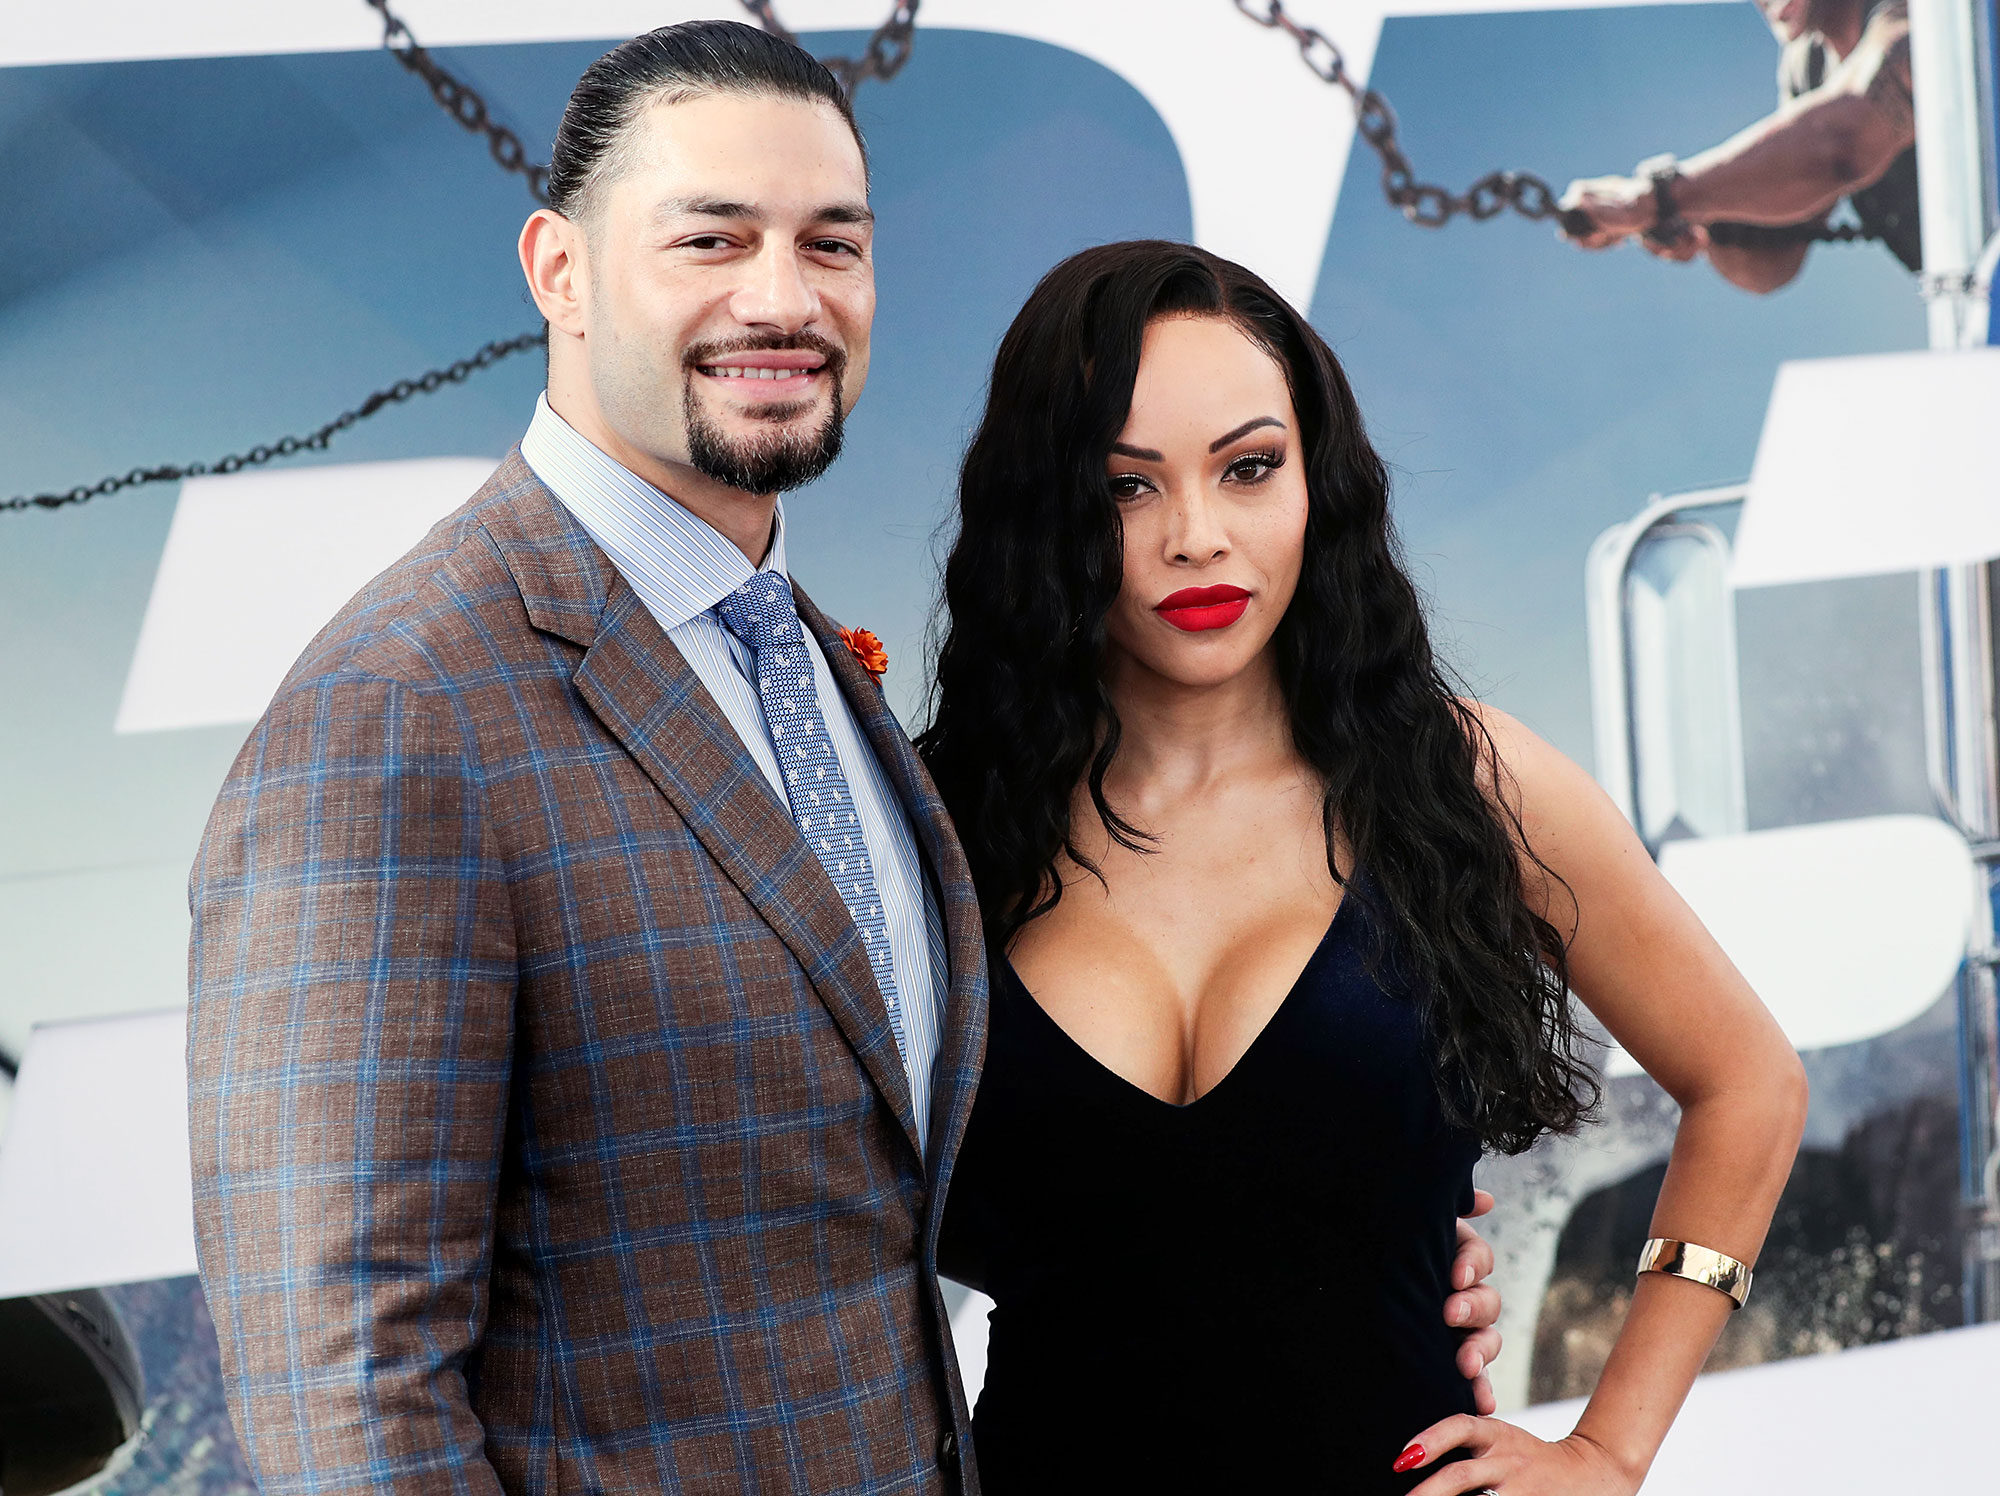 WWE-Star-Roman-Reigns-and-Wife-Galina-Expecting-Twins-for-Second-Time.jpg